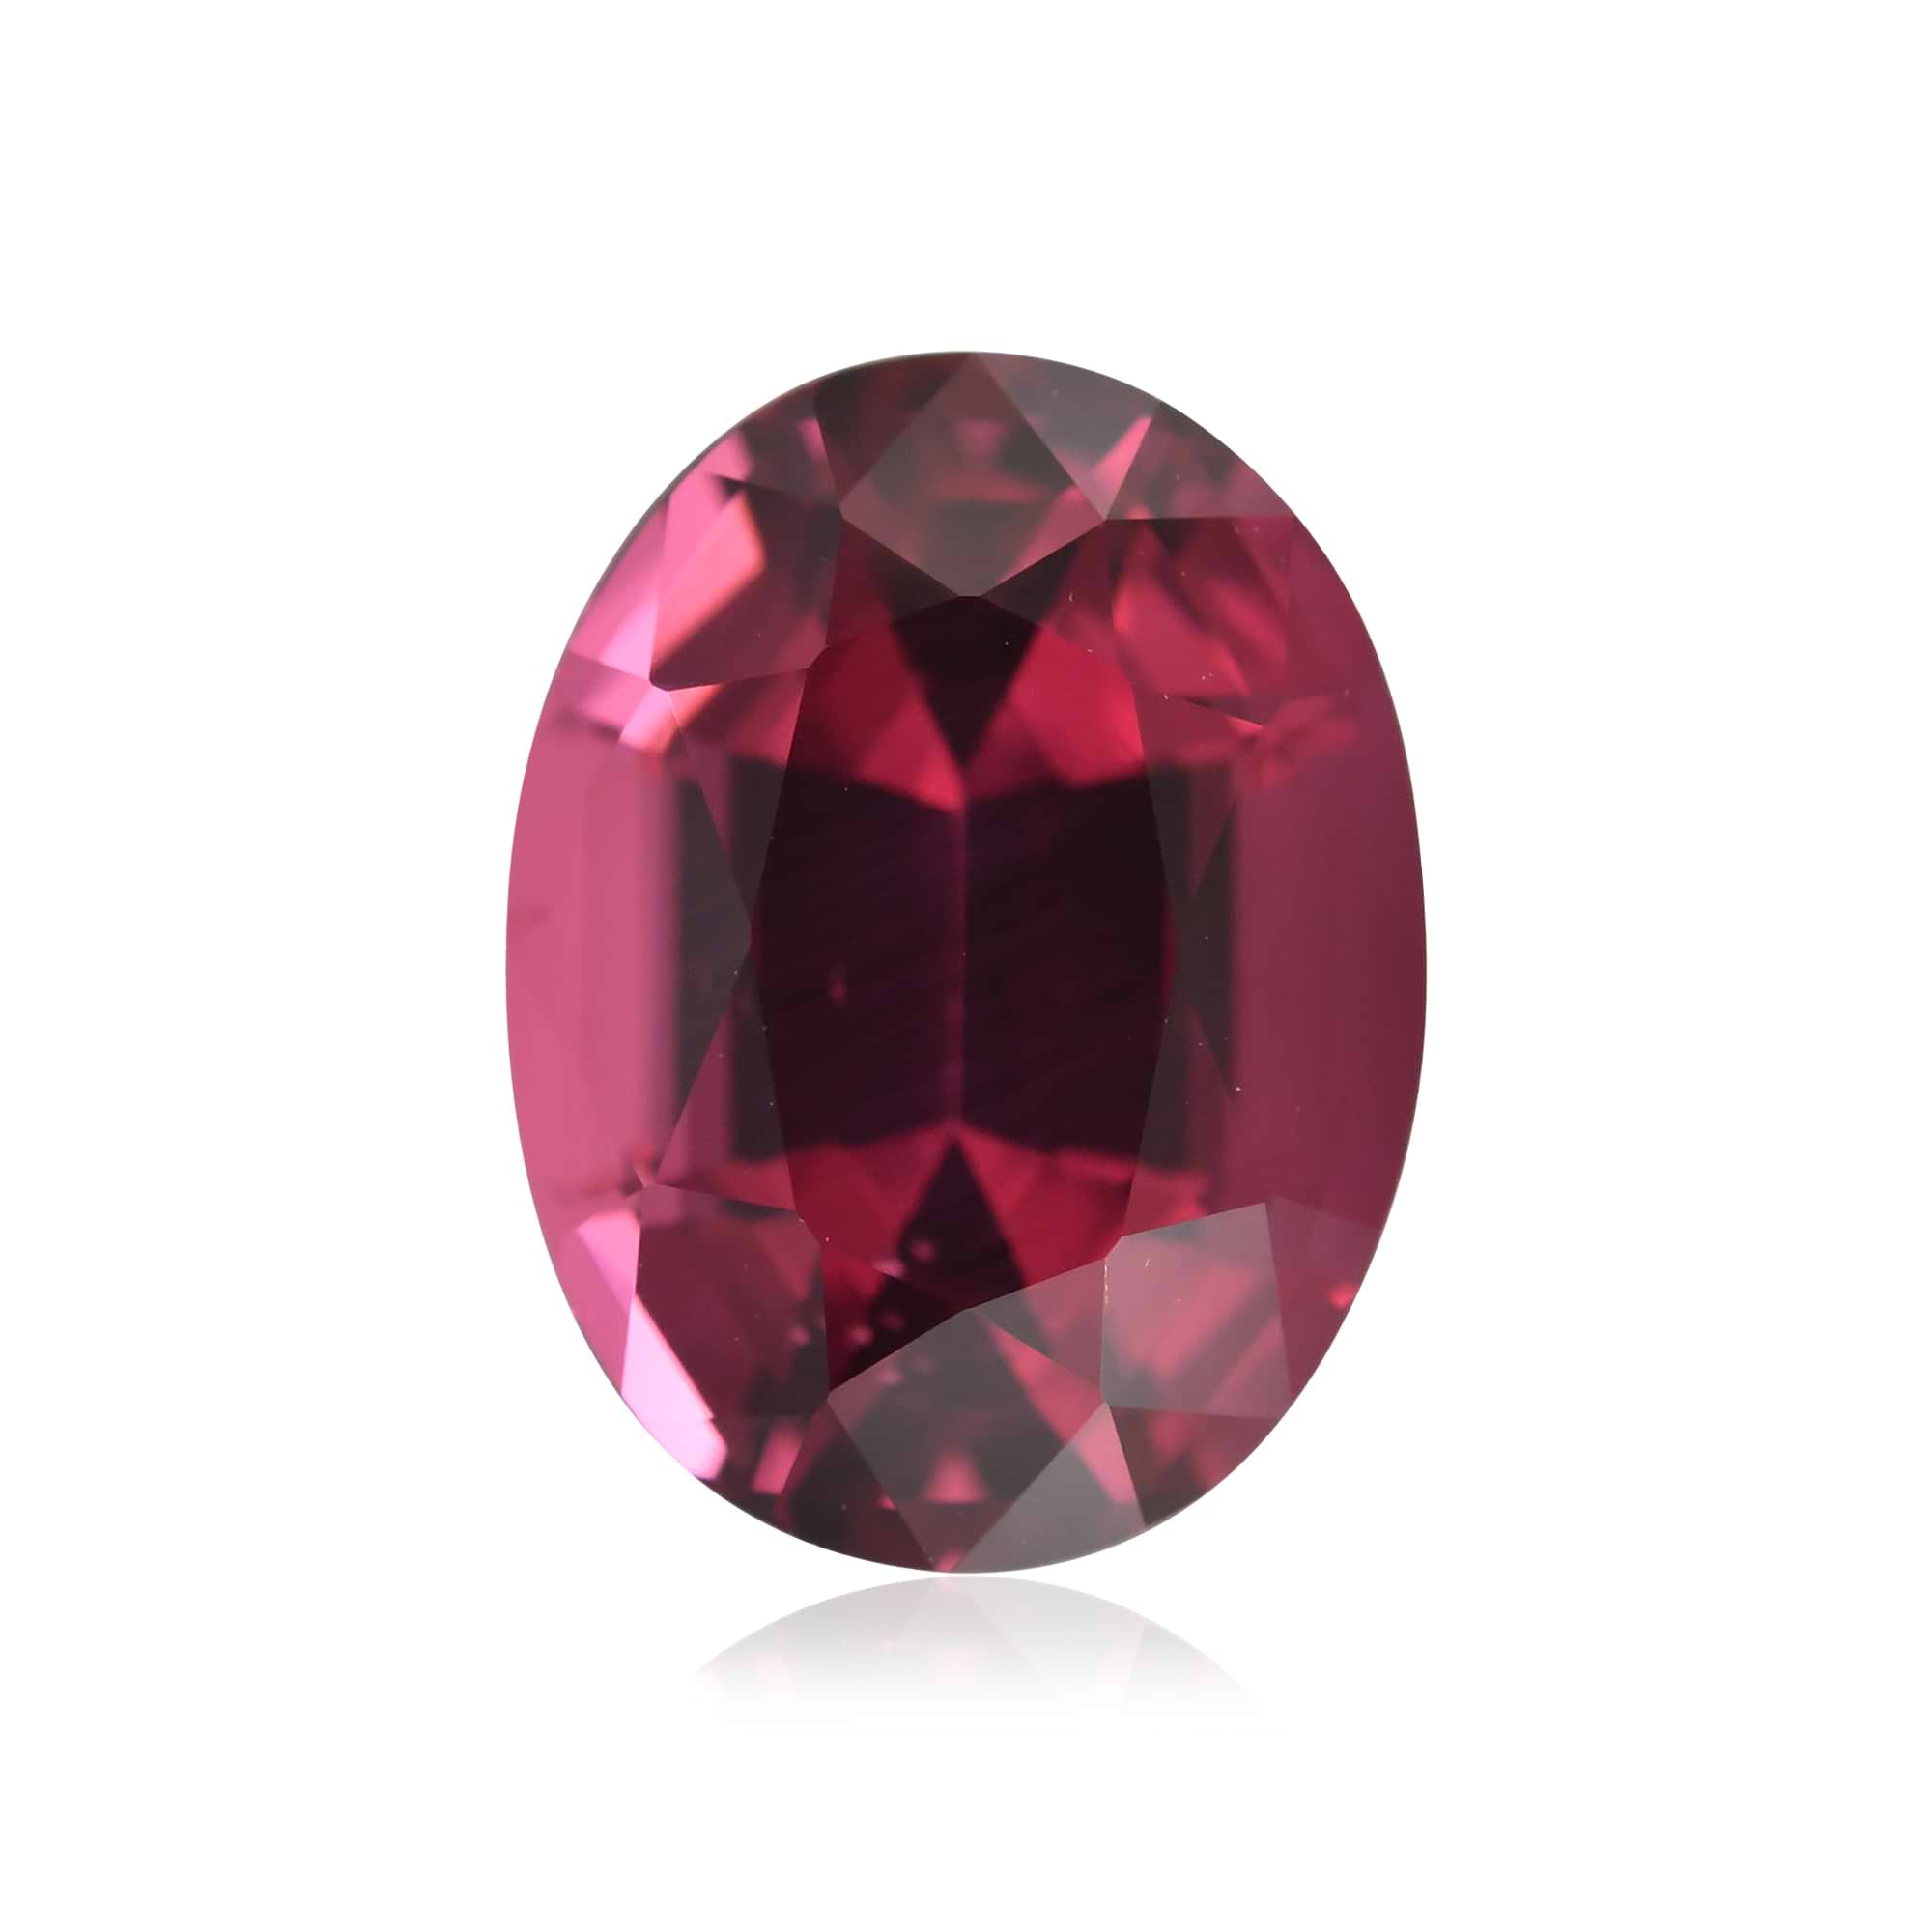 4.52 carat, Red, Spinel, Oval Shape, No evidence of heat enhancement, GIA